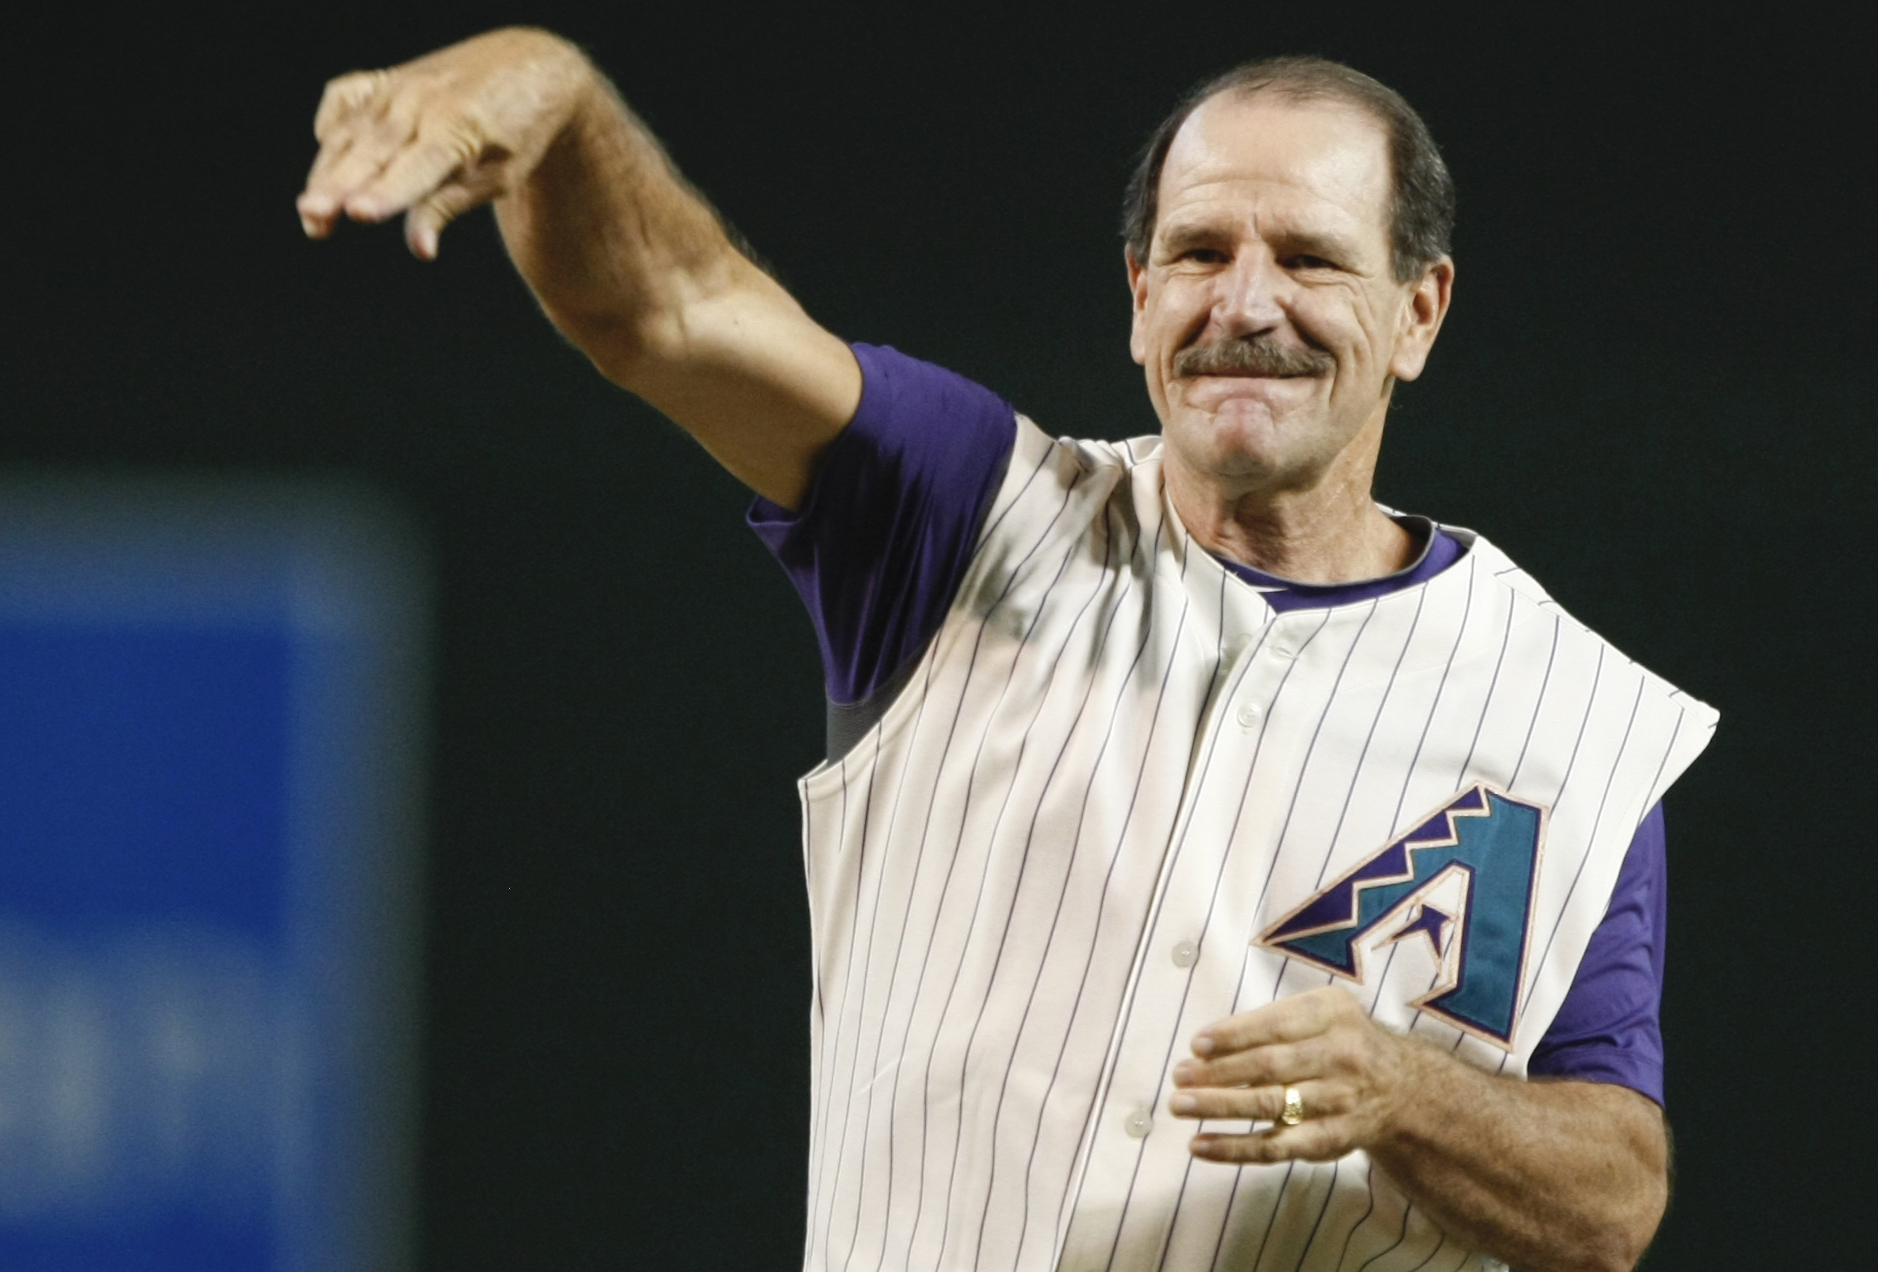 Diamondbacks' broadcaster Bob Brenly commenting on Marcus Stroman: pretty  sure that's the same durag Tom Seaver used to wear when he pitched for the  Mets : r/baseball